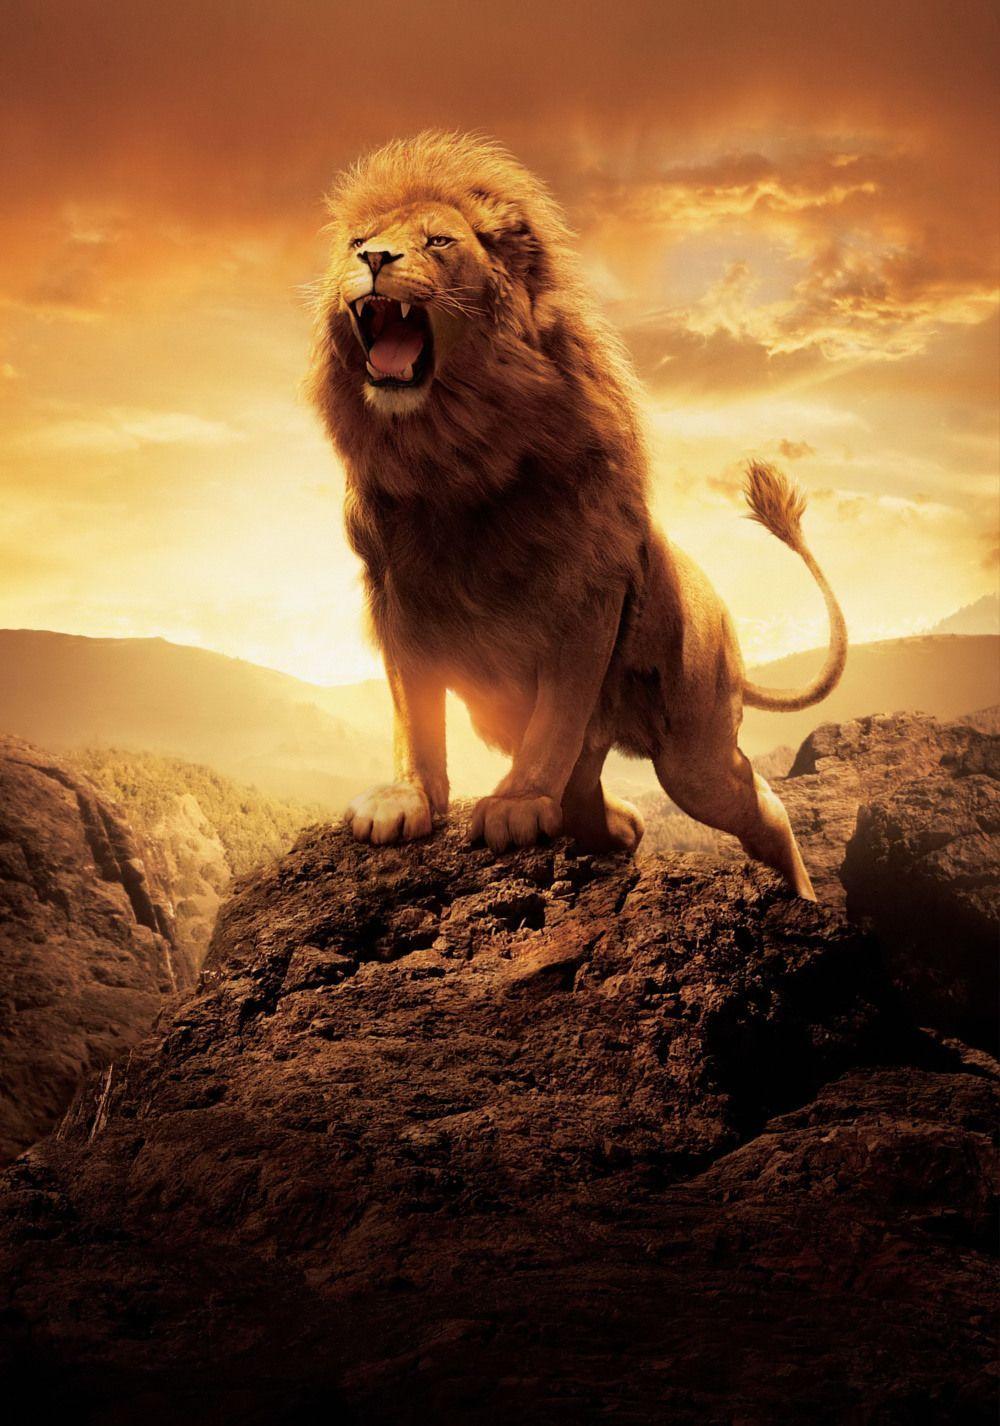 Promotional art of Aslan roaring for The Chronicles of Narnia